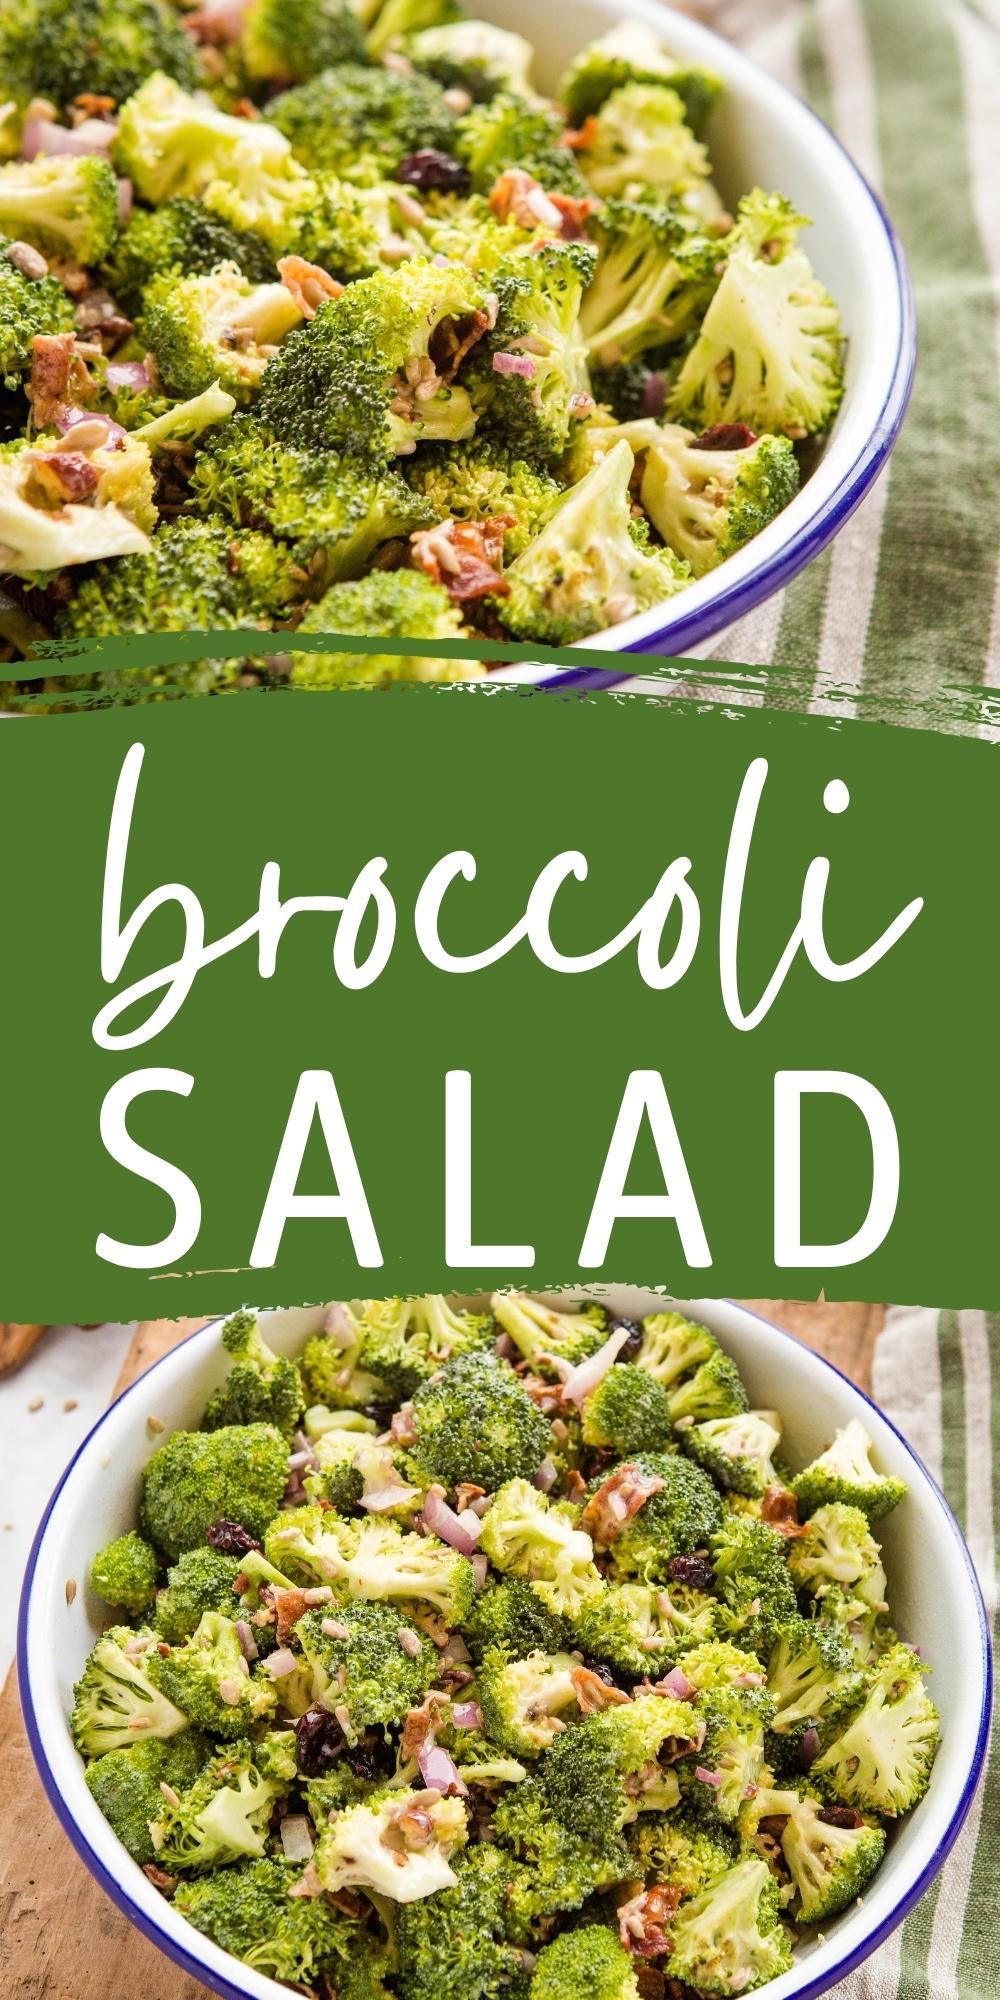 This Crunchy Broccoli Salad is a classic summer side dish made with fresh broccoli, bacon, sweet onion, and a creamy dressing! So easy and perfect for summer potlucks and barbecues! Recipe from thebusybaker.ca! #crunchbroccolisalad #broccolisalad #potluckrecipe #summersalad #salad #veggies #healthy #barbecue via @busybakerblog